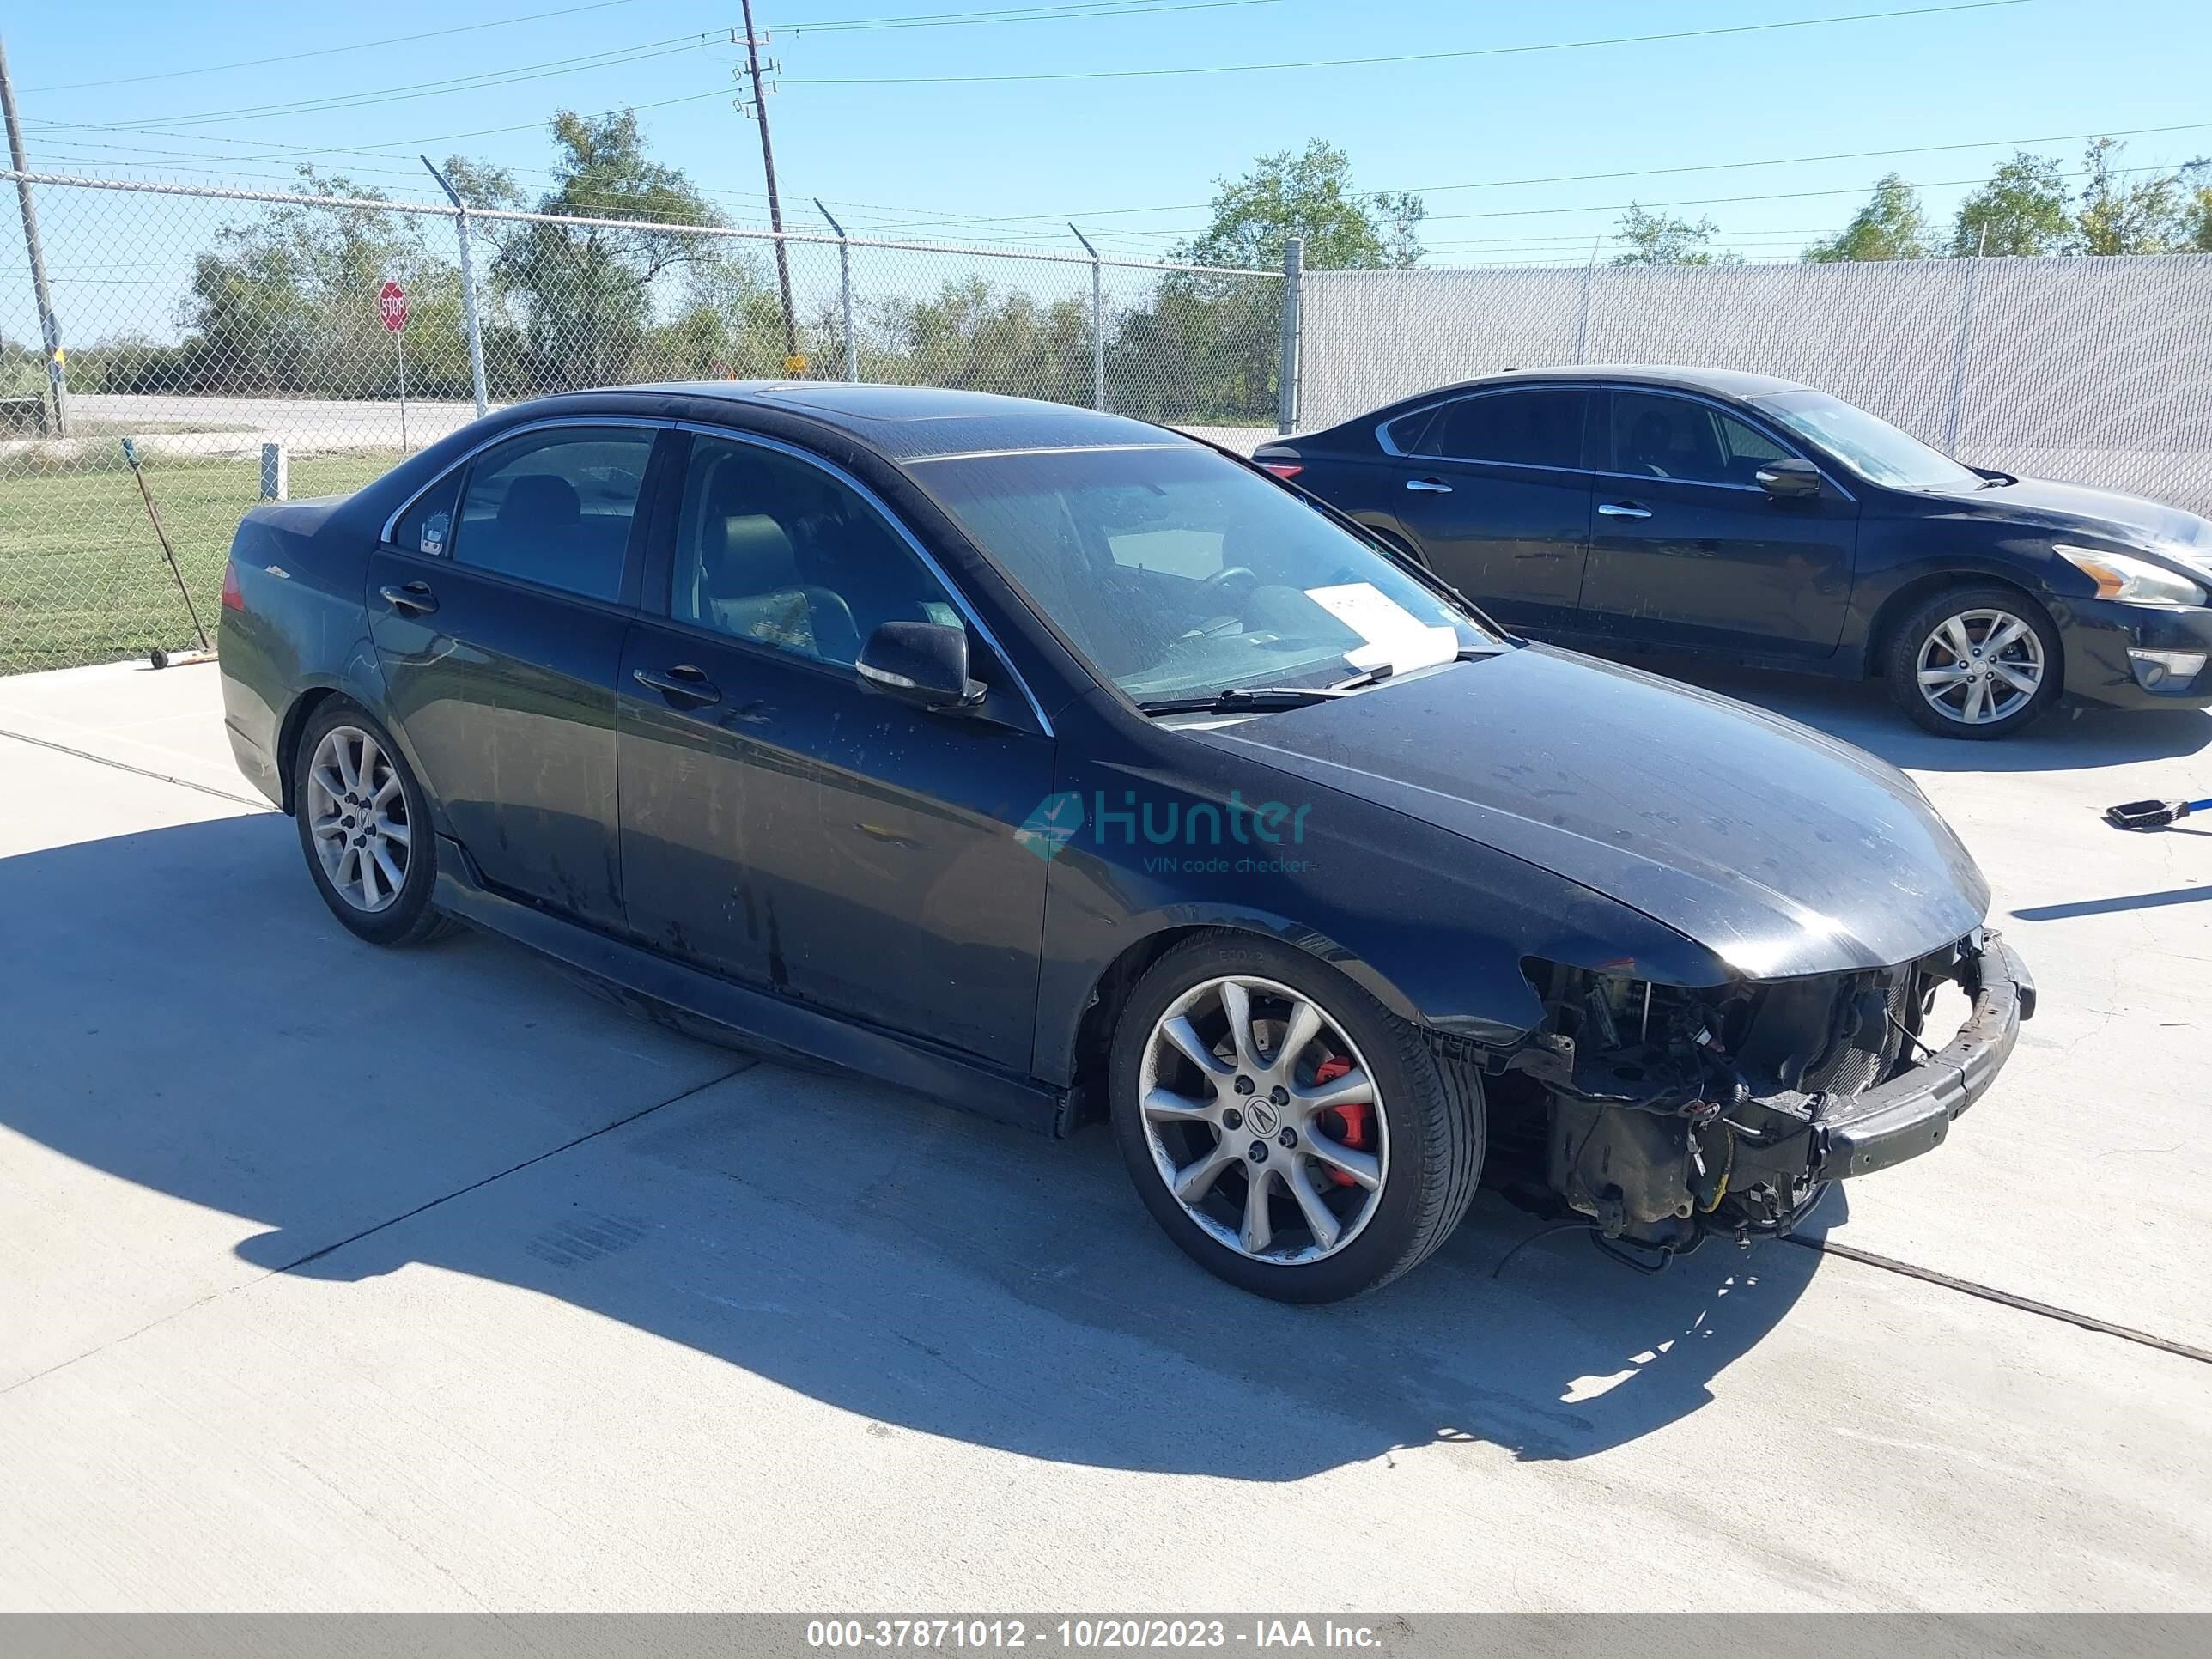 acura tsx 2006 jh4cl95886c028190